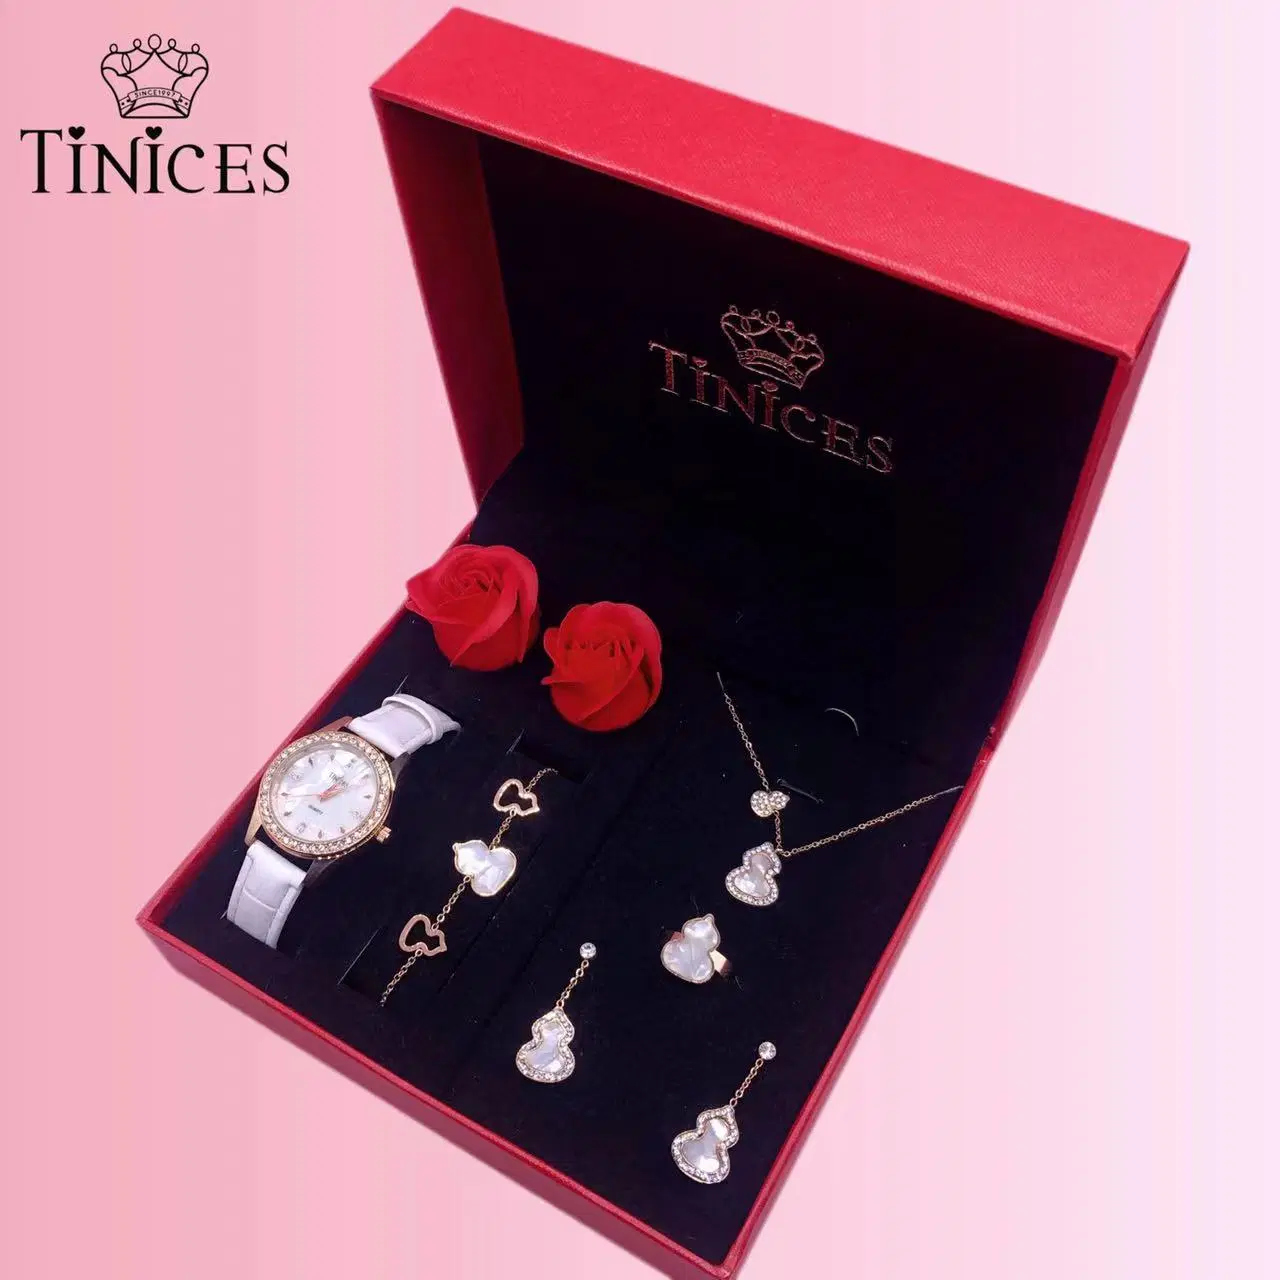 Non-Fading Ipg Watch Jewelry, High Quality Jewelry Watch Gift Box Set